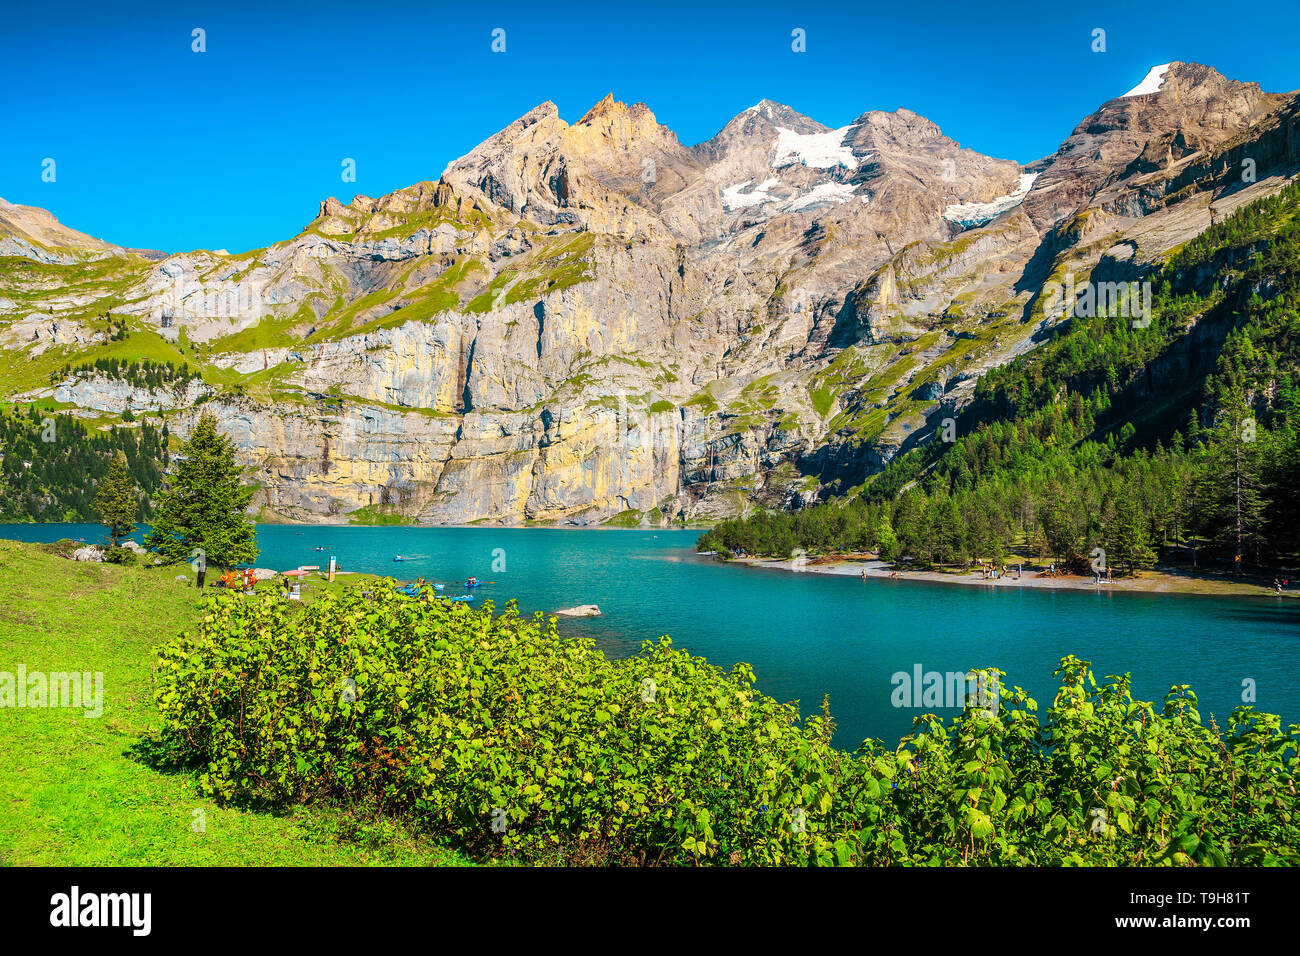 Popular travel and tourism location, beautiful alpine lake and snowy mountains with glaciers, Oeschinensee lake, Bernese Oberland, Switzerland, Europe Stock Photo